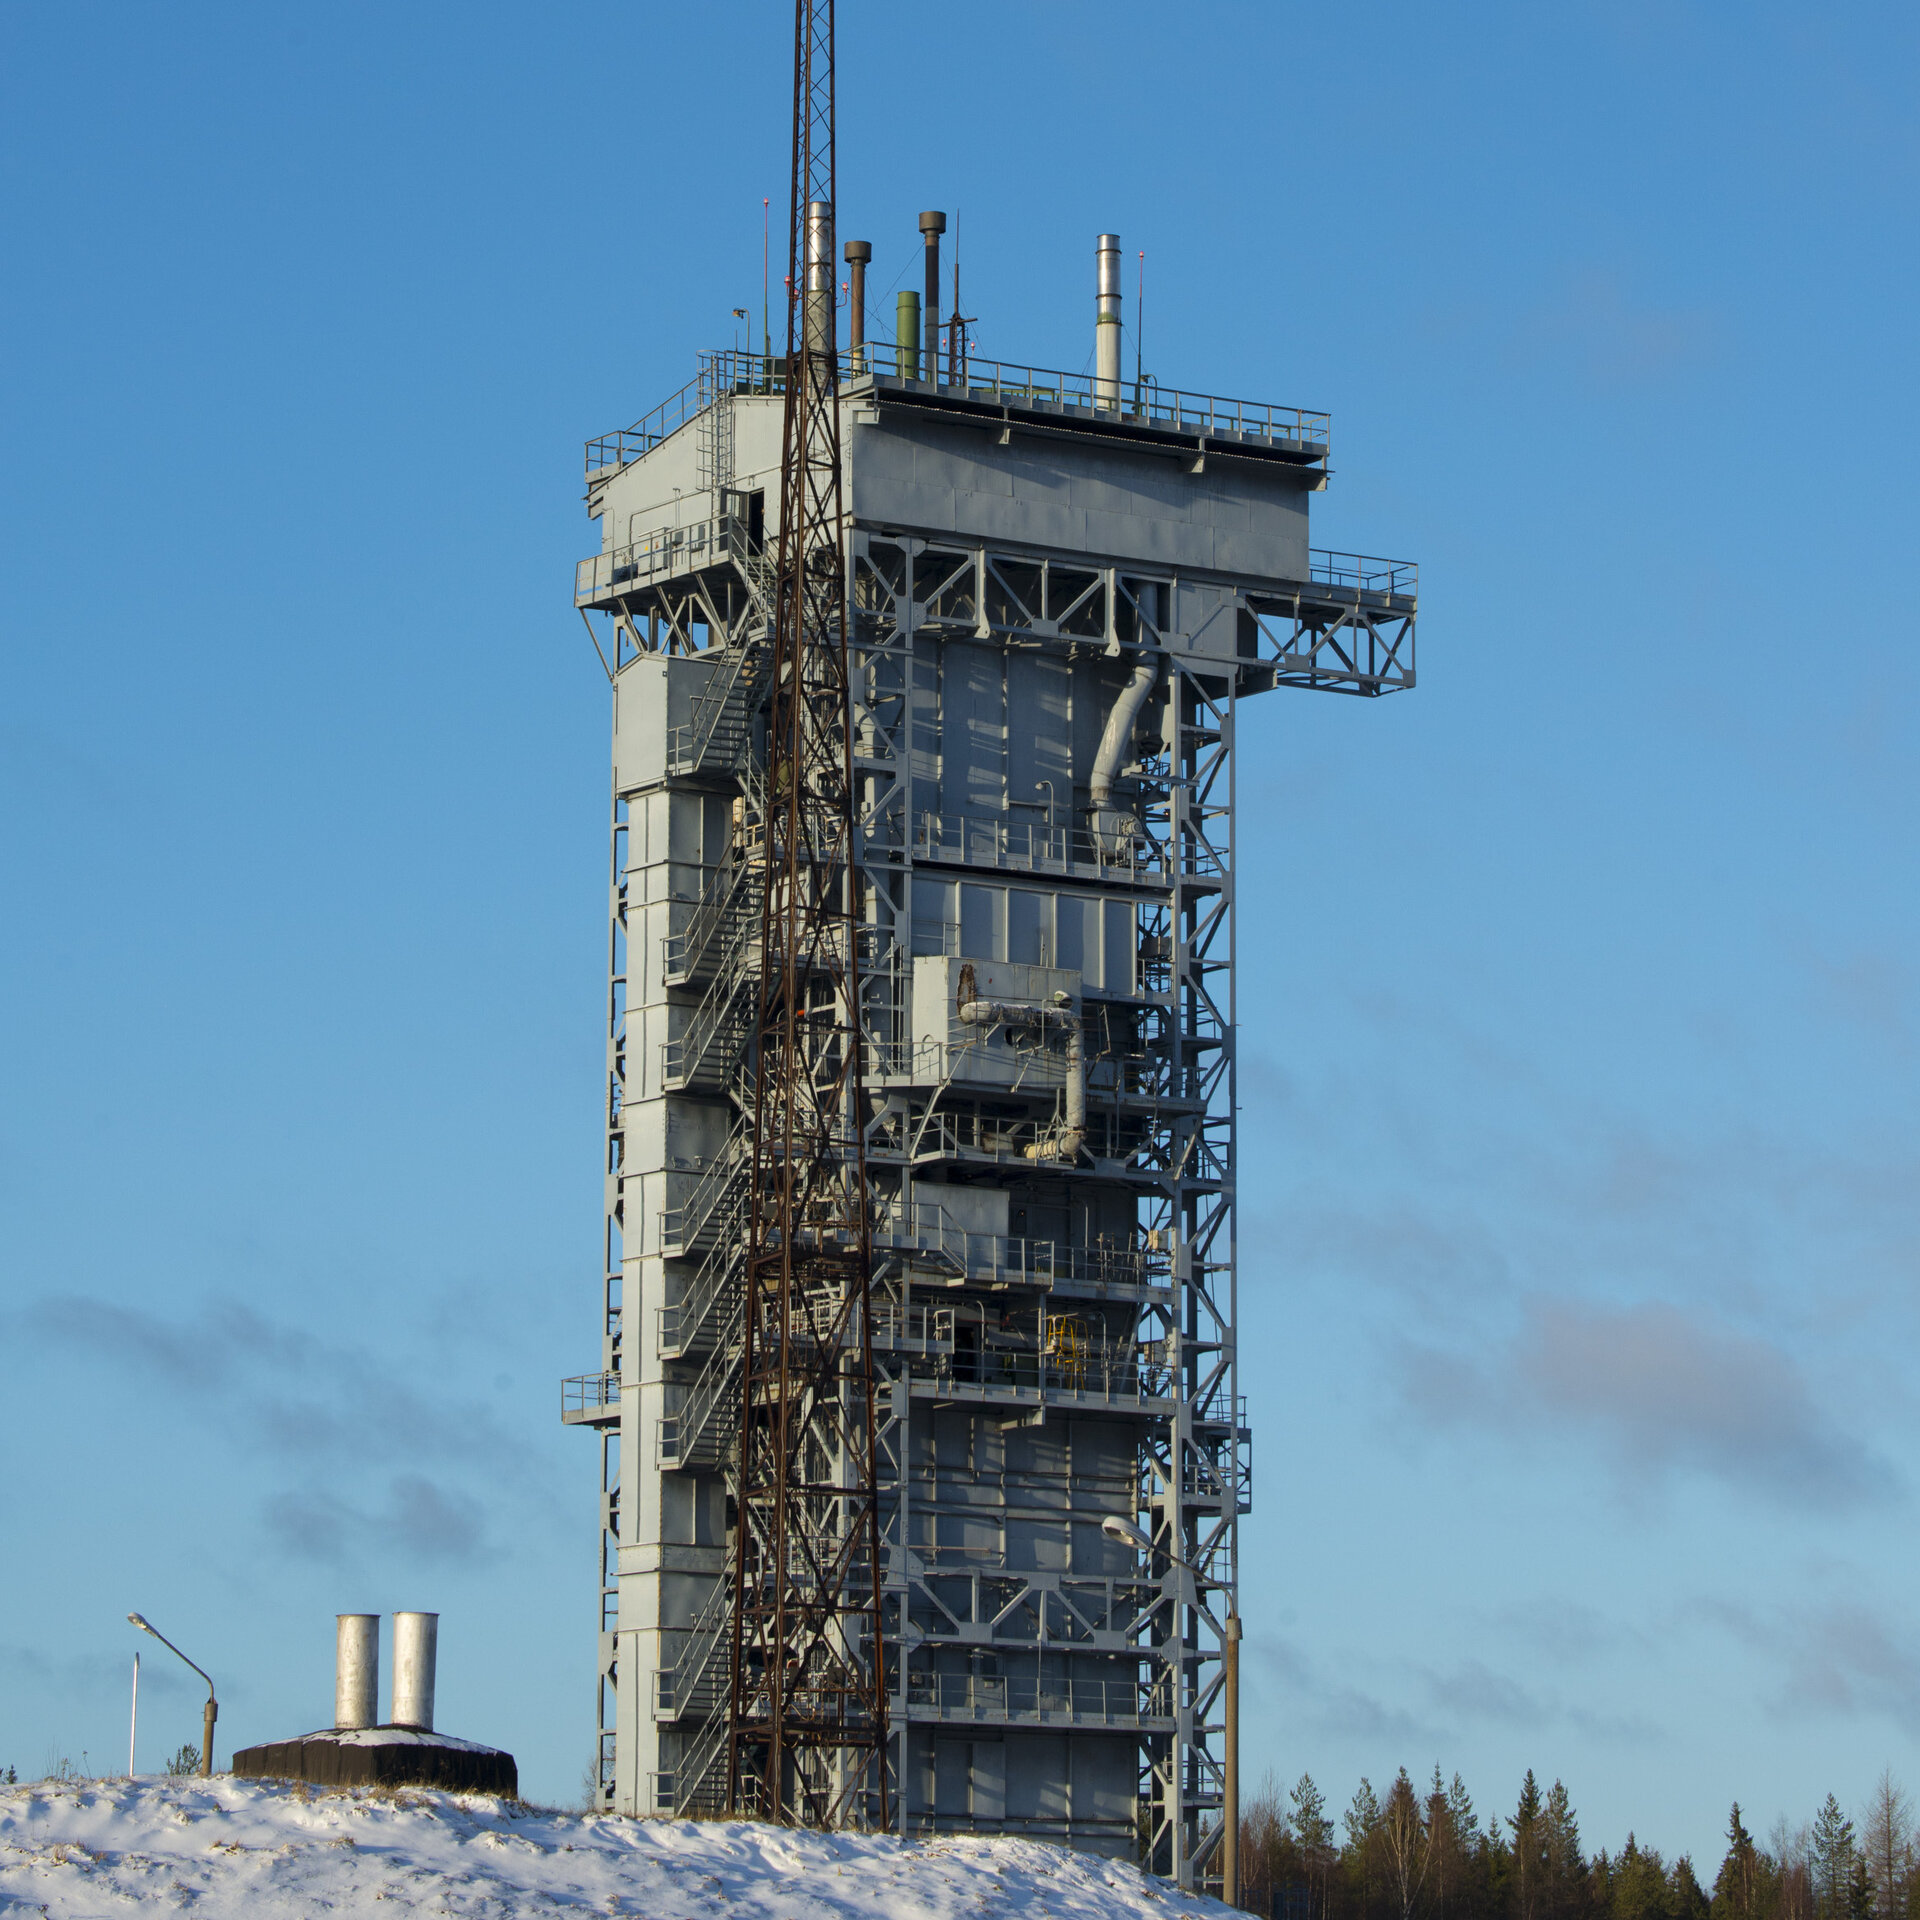 Rockot launch tower at the Plesetsk Cosmodrome 